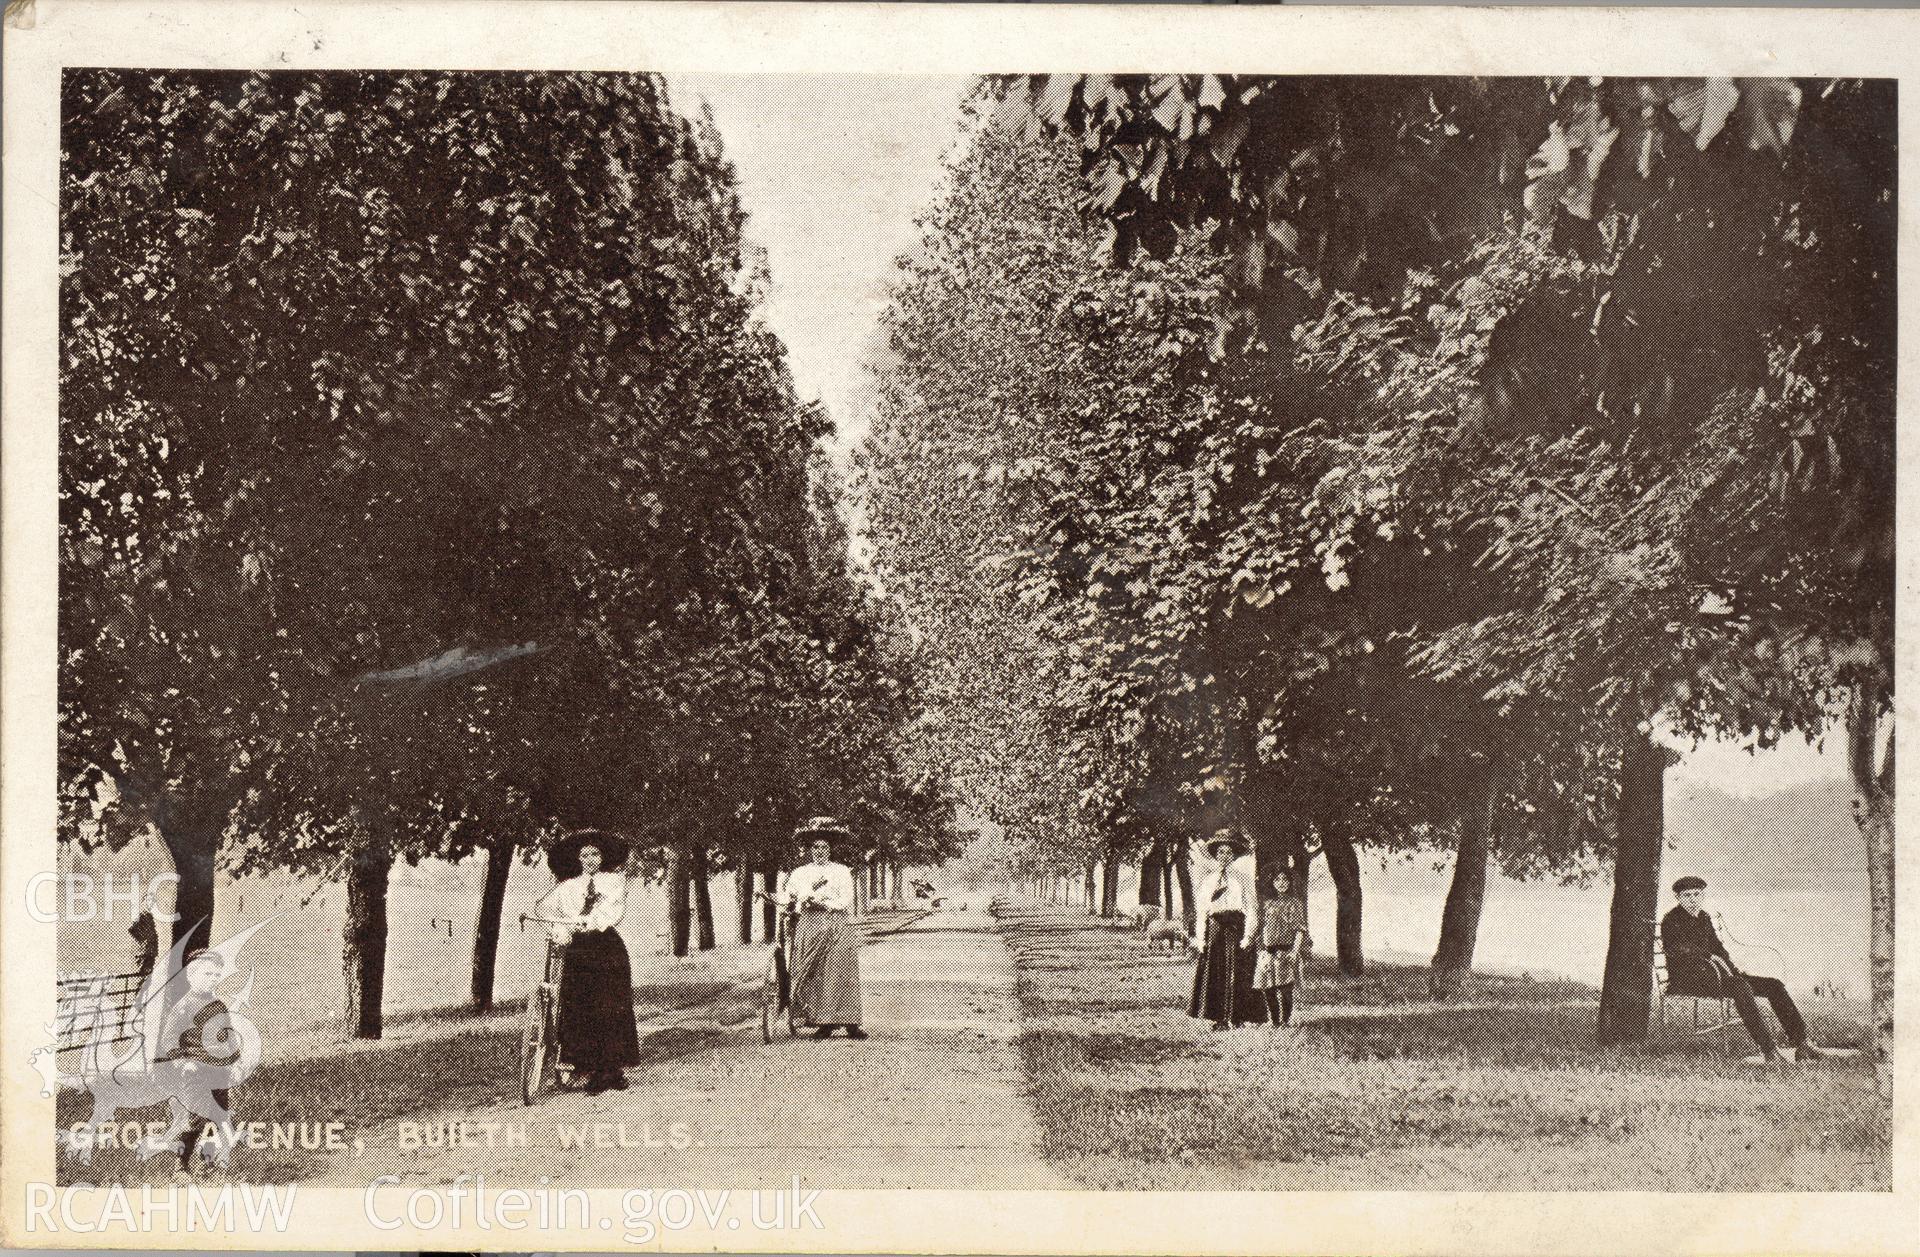 Digitised postcard image of Groe Avenue, Builth Wells, J. Clark, Castle Street, Builth Wells. Produced by Parks and Gardens Data Services, from an original item in the Peter Davis Collection at Parks and Gardens UK. We hold only web-resolution images of this collection, suitable for viewing on screen and for research purposes only. We do not hold the original images, or publication quality scans.